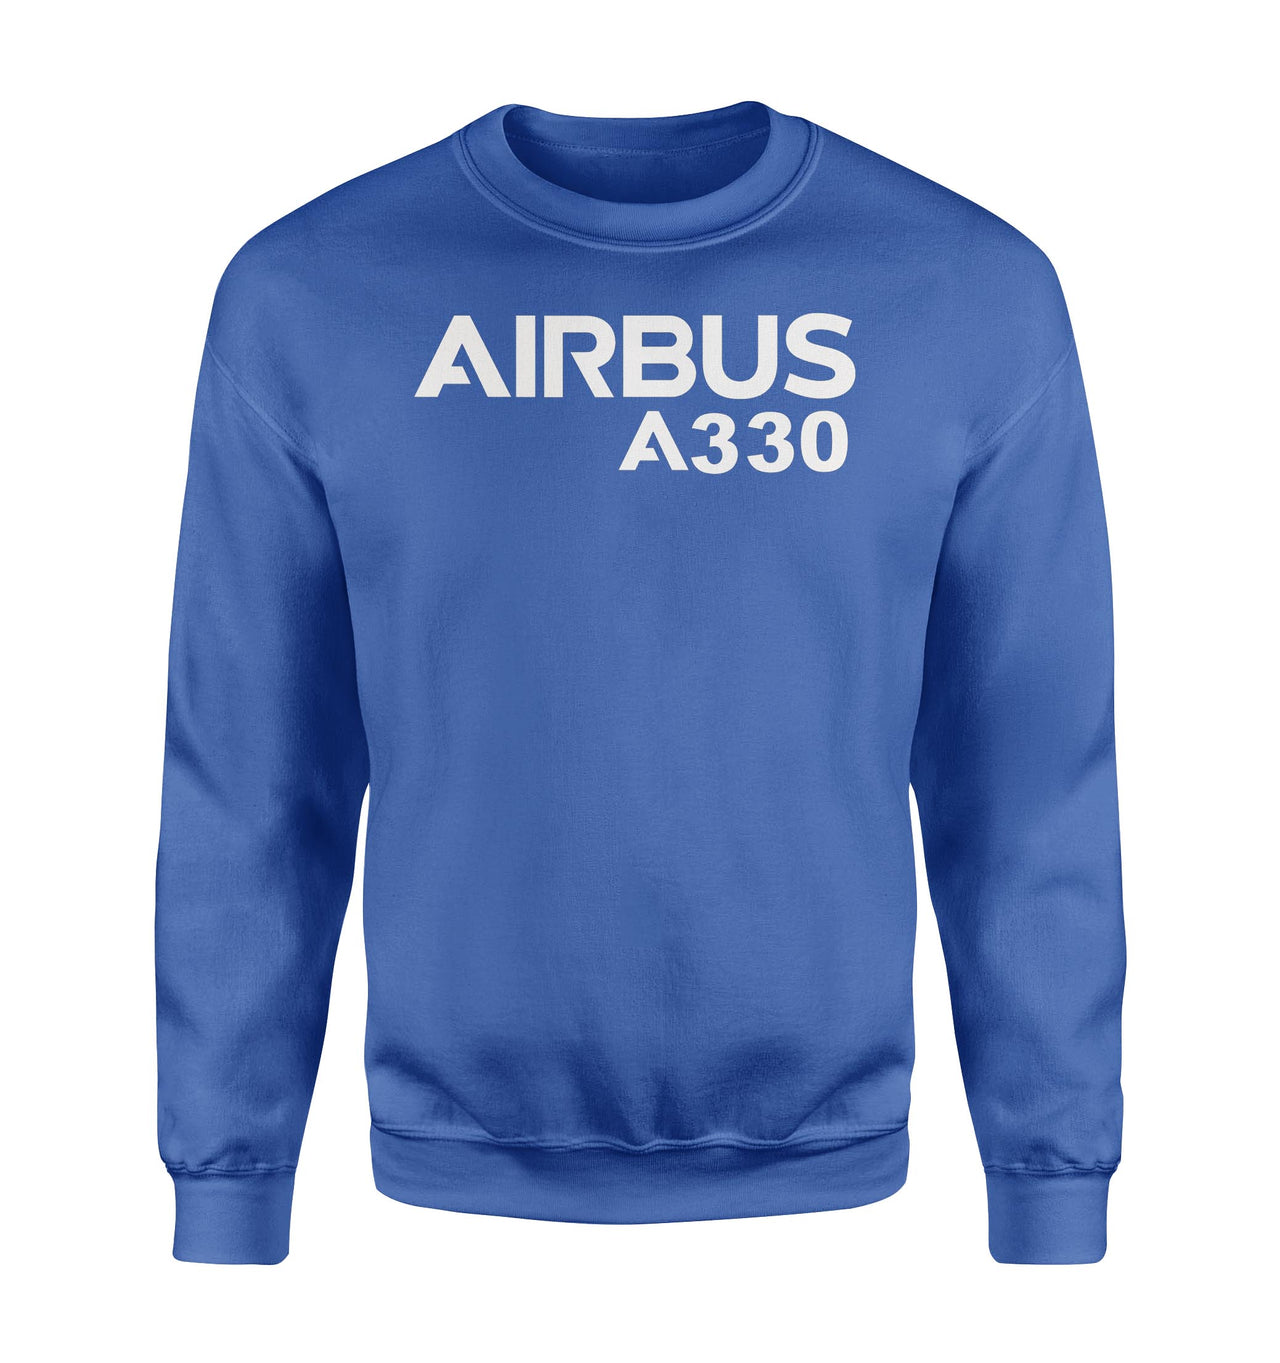 Airbus A330 & Text Designed Sweatshirts